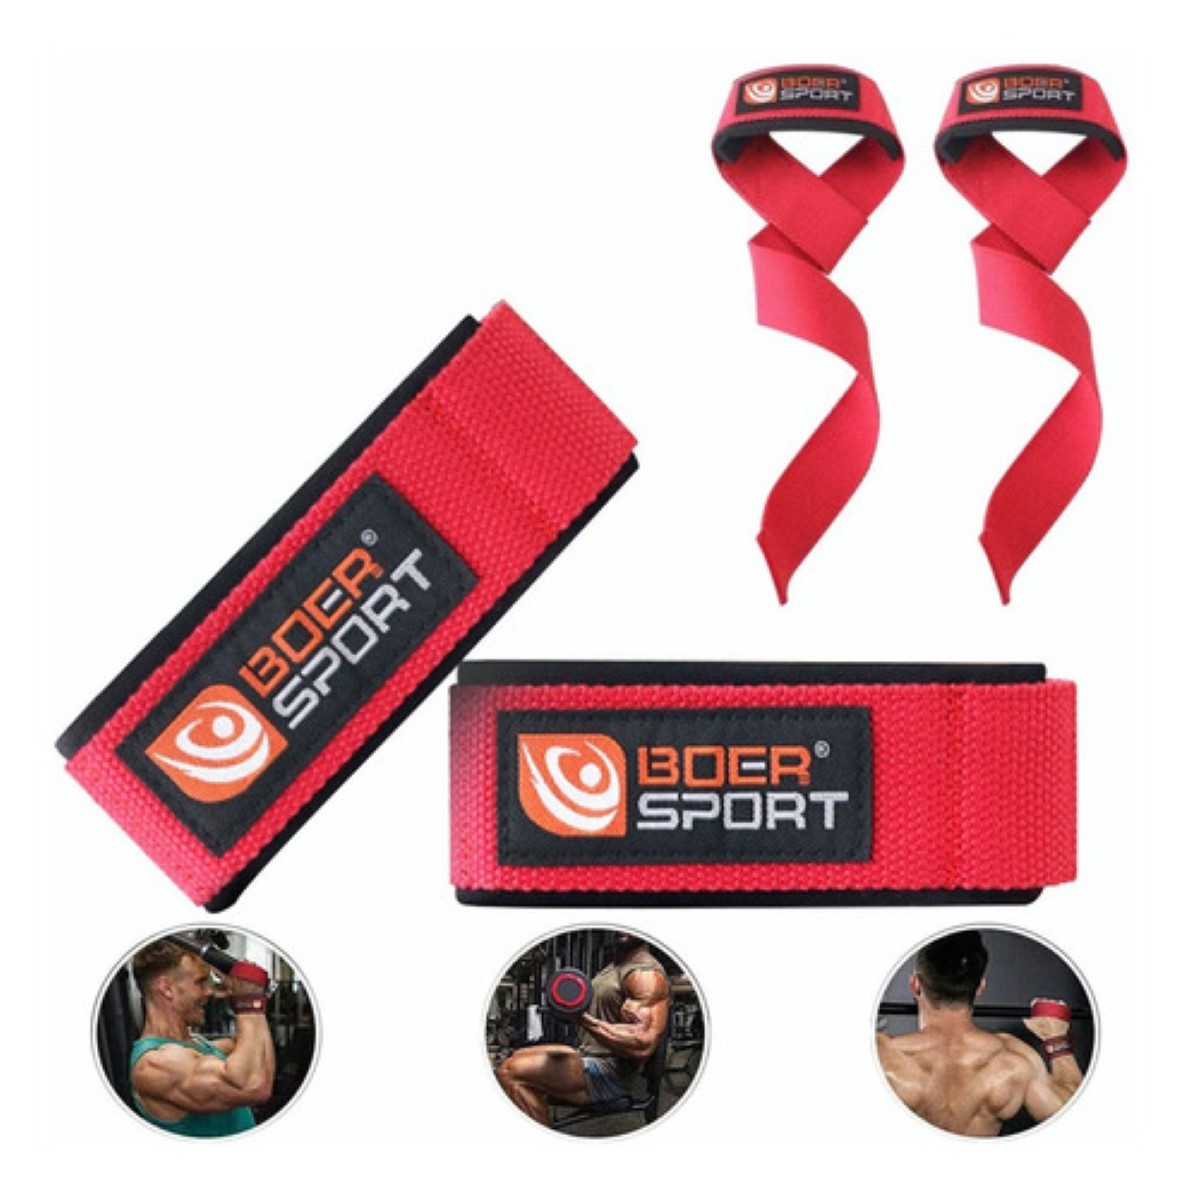 Cinta deportiva para cabeza Roly 9001 CROSSFITTER (pack 10 uds.)